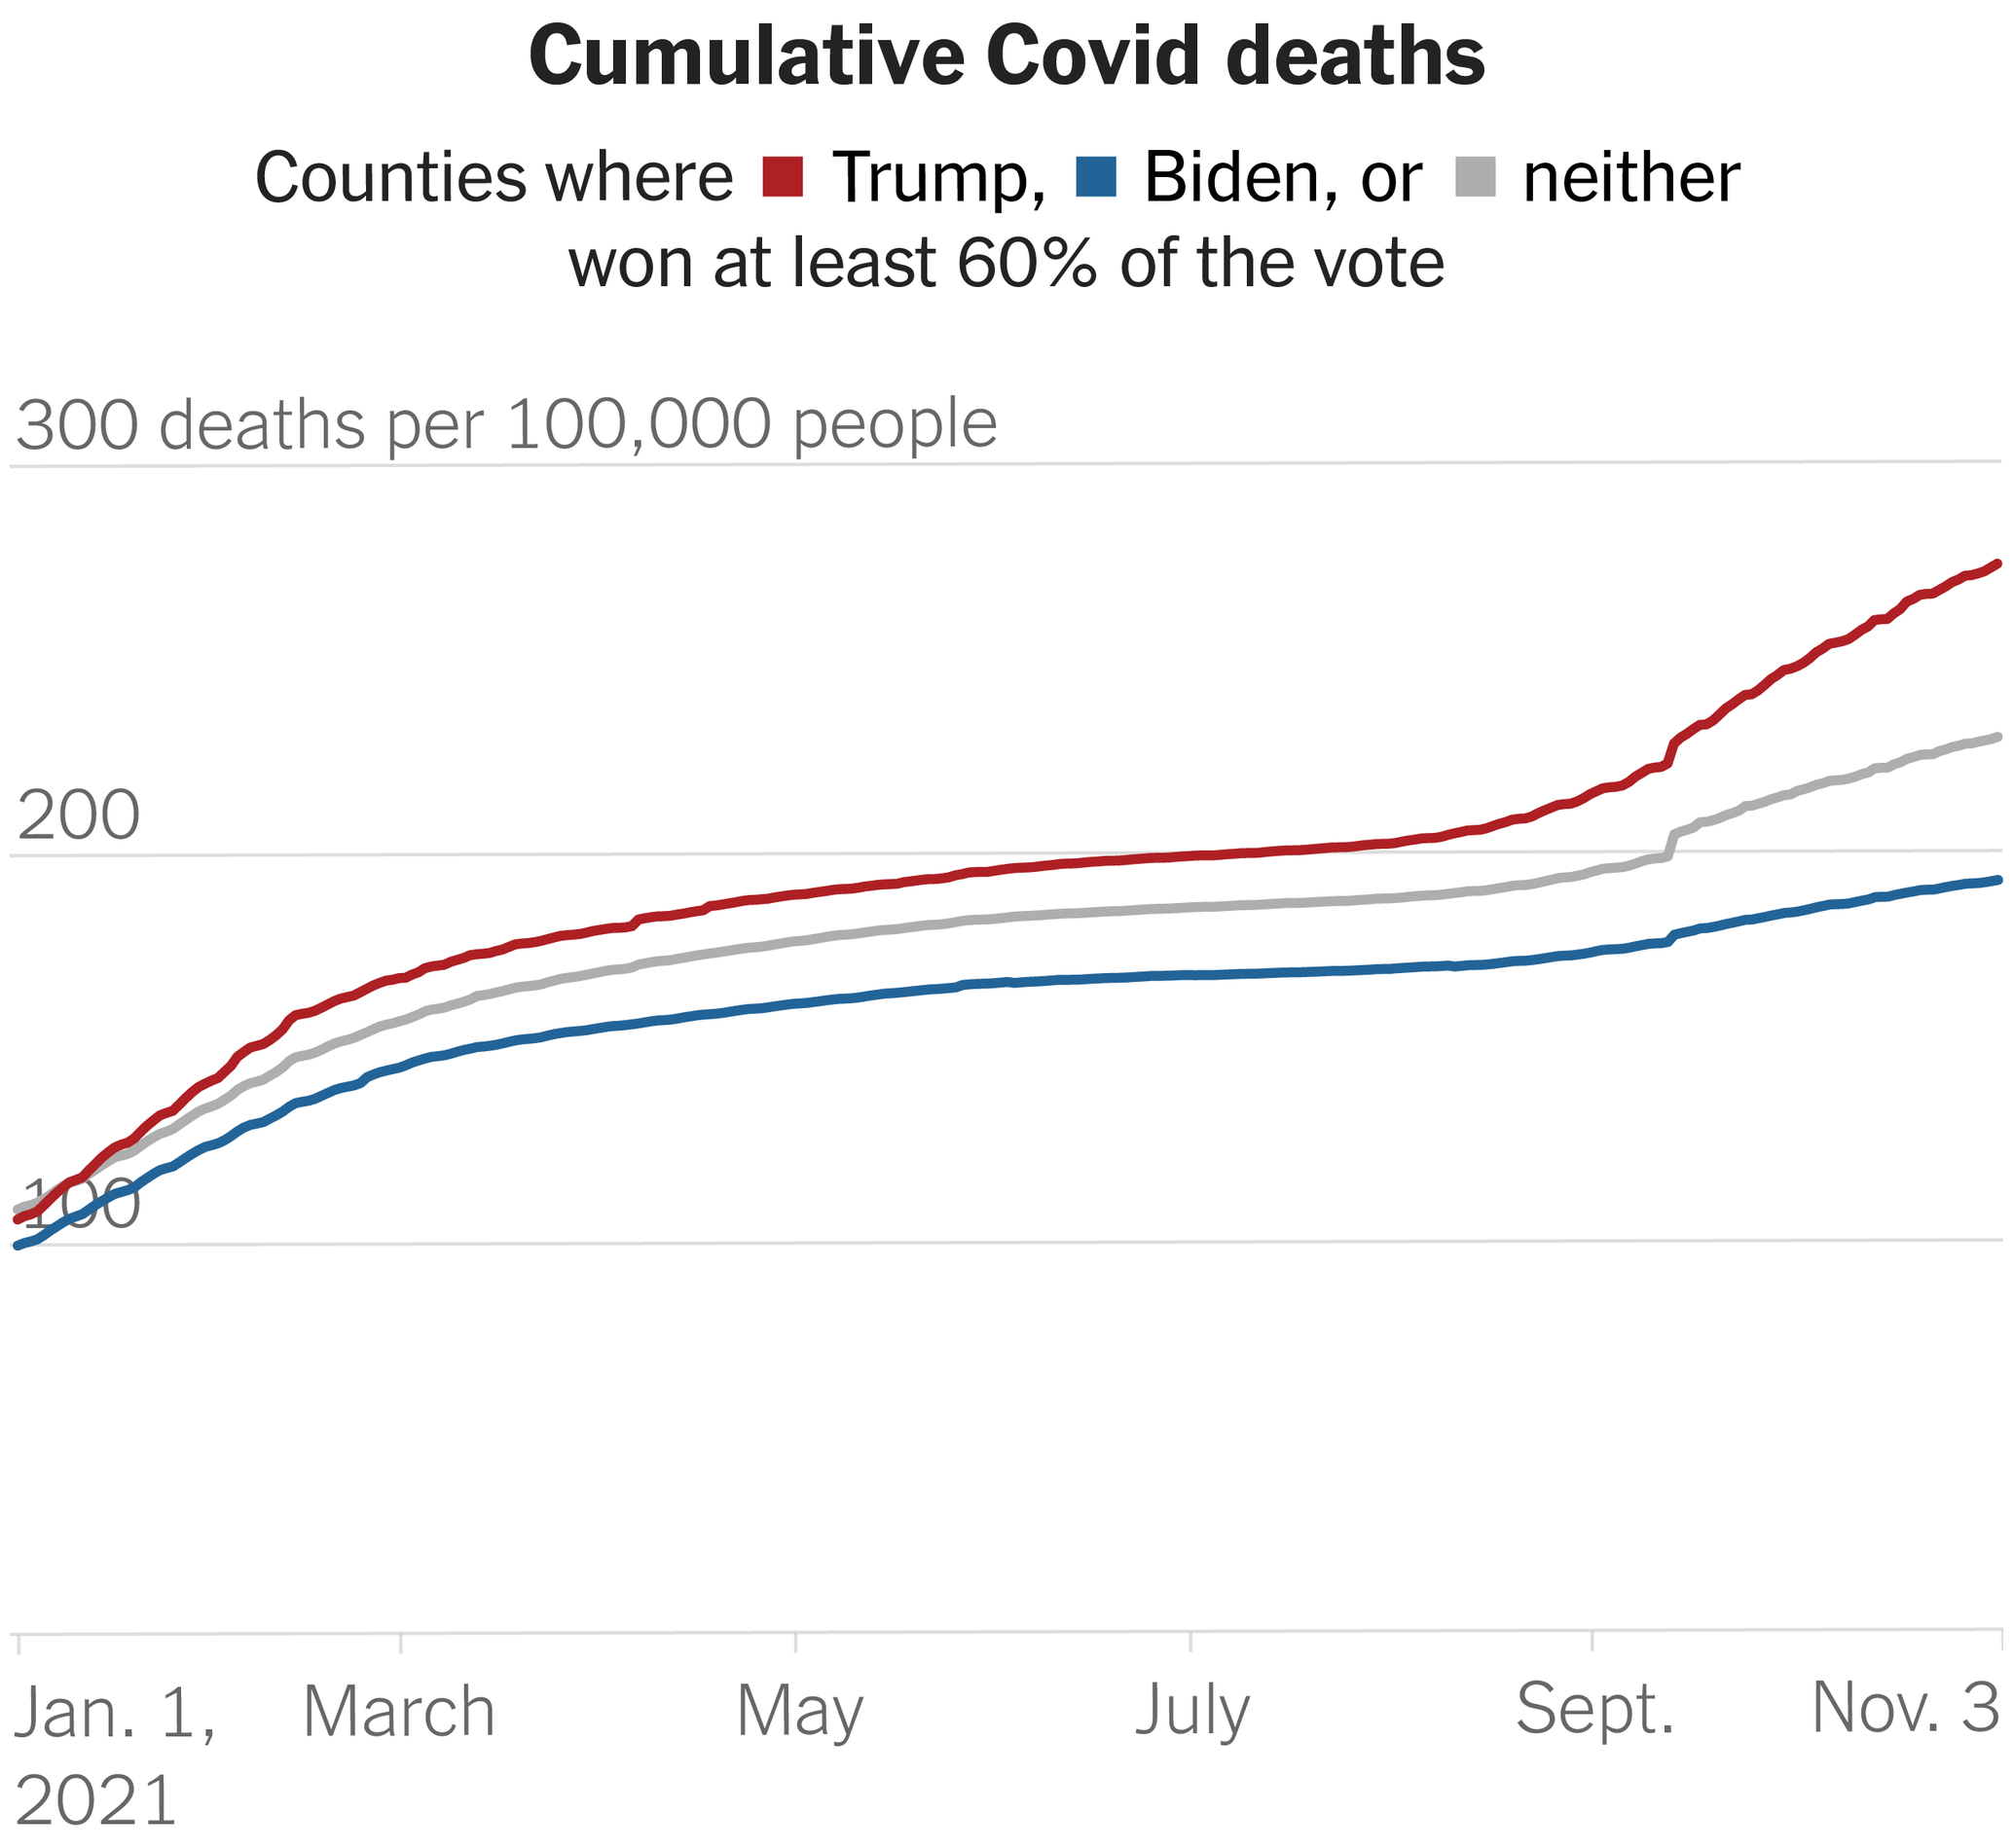 Cumulative U.S. Covid deaths by county and political alignment, 1 January 2021 - 3 November 2021. The gap in Covid’s death toll between Republican and Democratic America grew faster in October 2021 than at any previous point during the pandemic. In October 2021, 25 out of every 100,000 residents of heavily Trump counties died from Covid, more than three times higher than the rate in heavily Biden counties (7.8 per 100,000). October was the fifth consecutive month that the percentage gap between the death rates in Trump counties and Biden counties widened. Data: New York Times database / Edison Research. Graphic: The New York Times